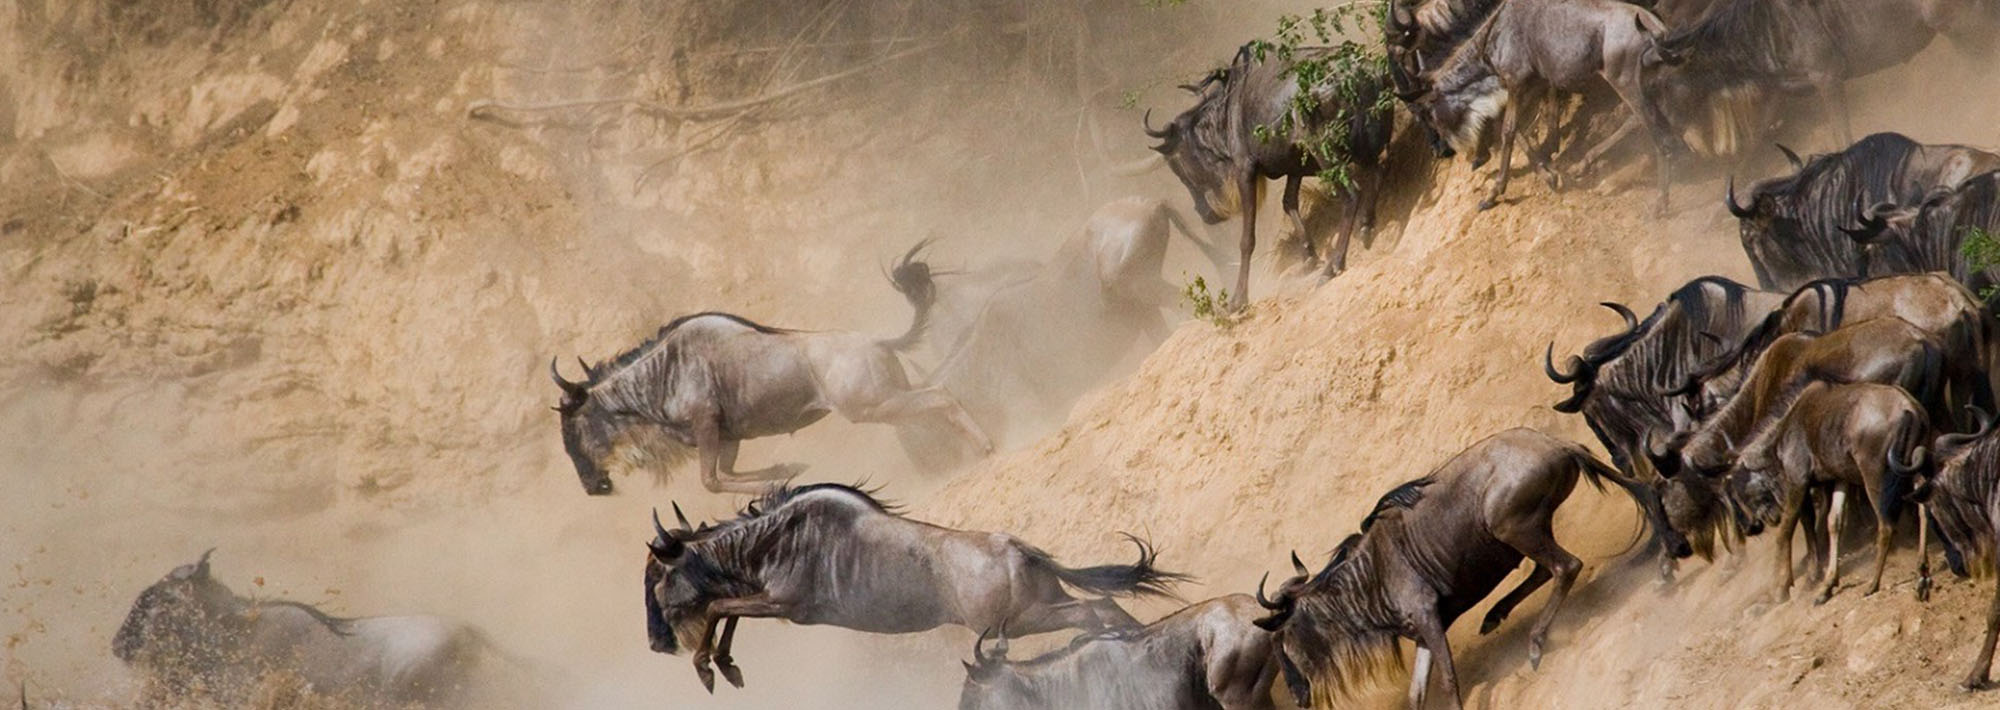 The Wildebeest Migration From Seasonal Camps Natural High Safaris